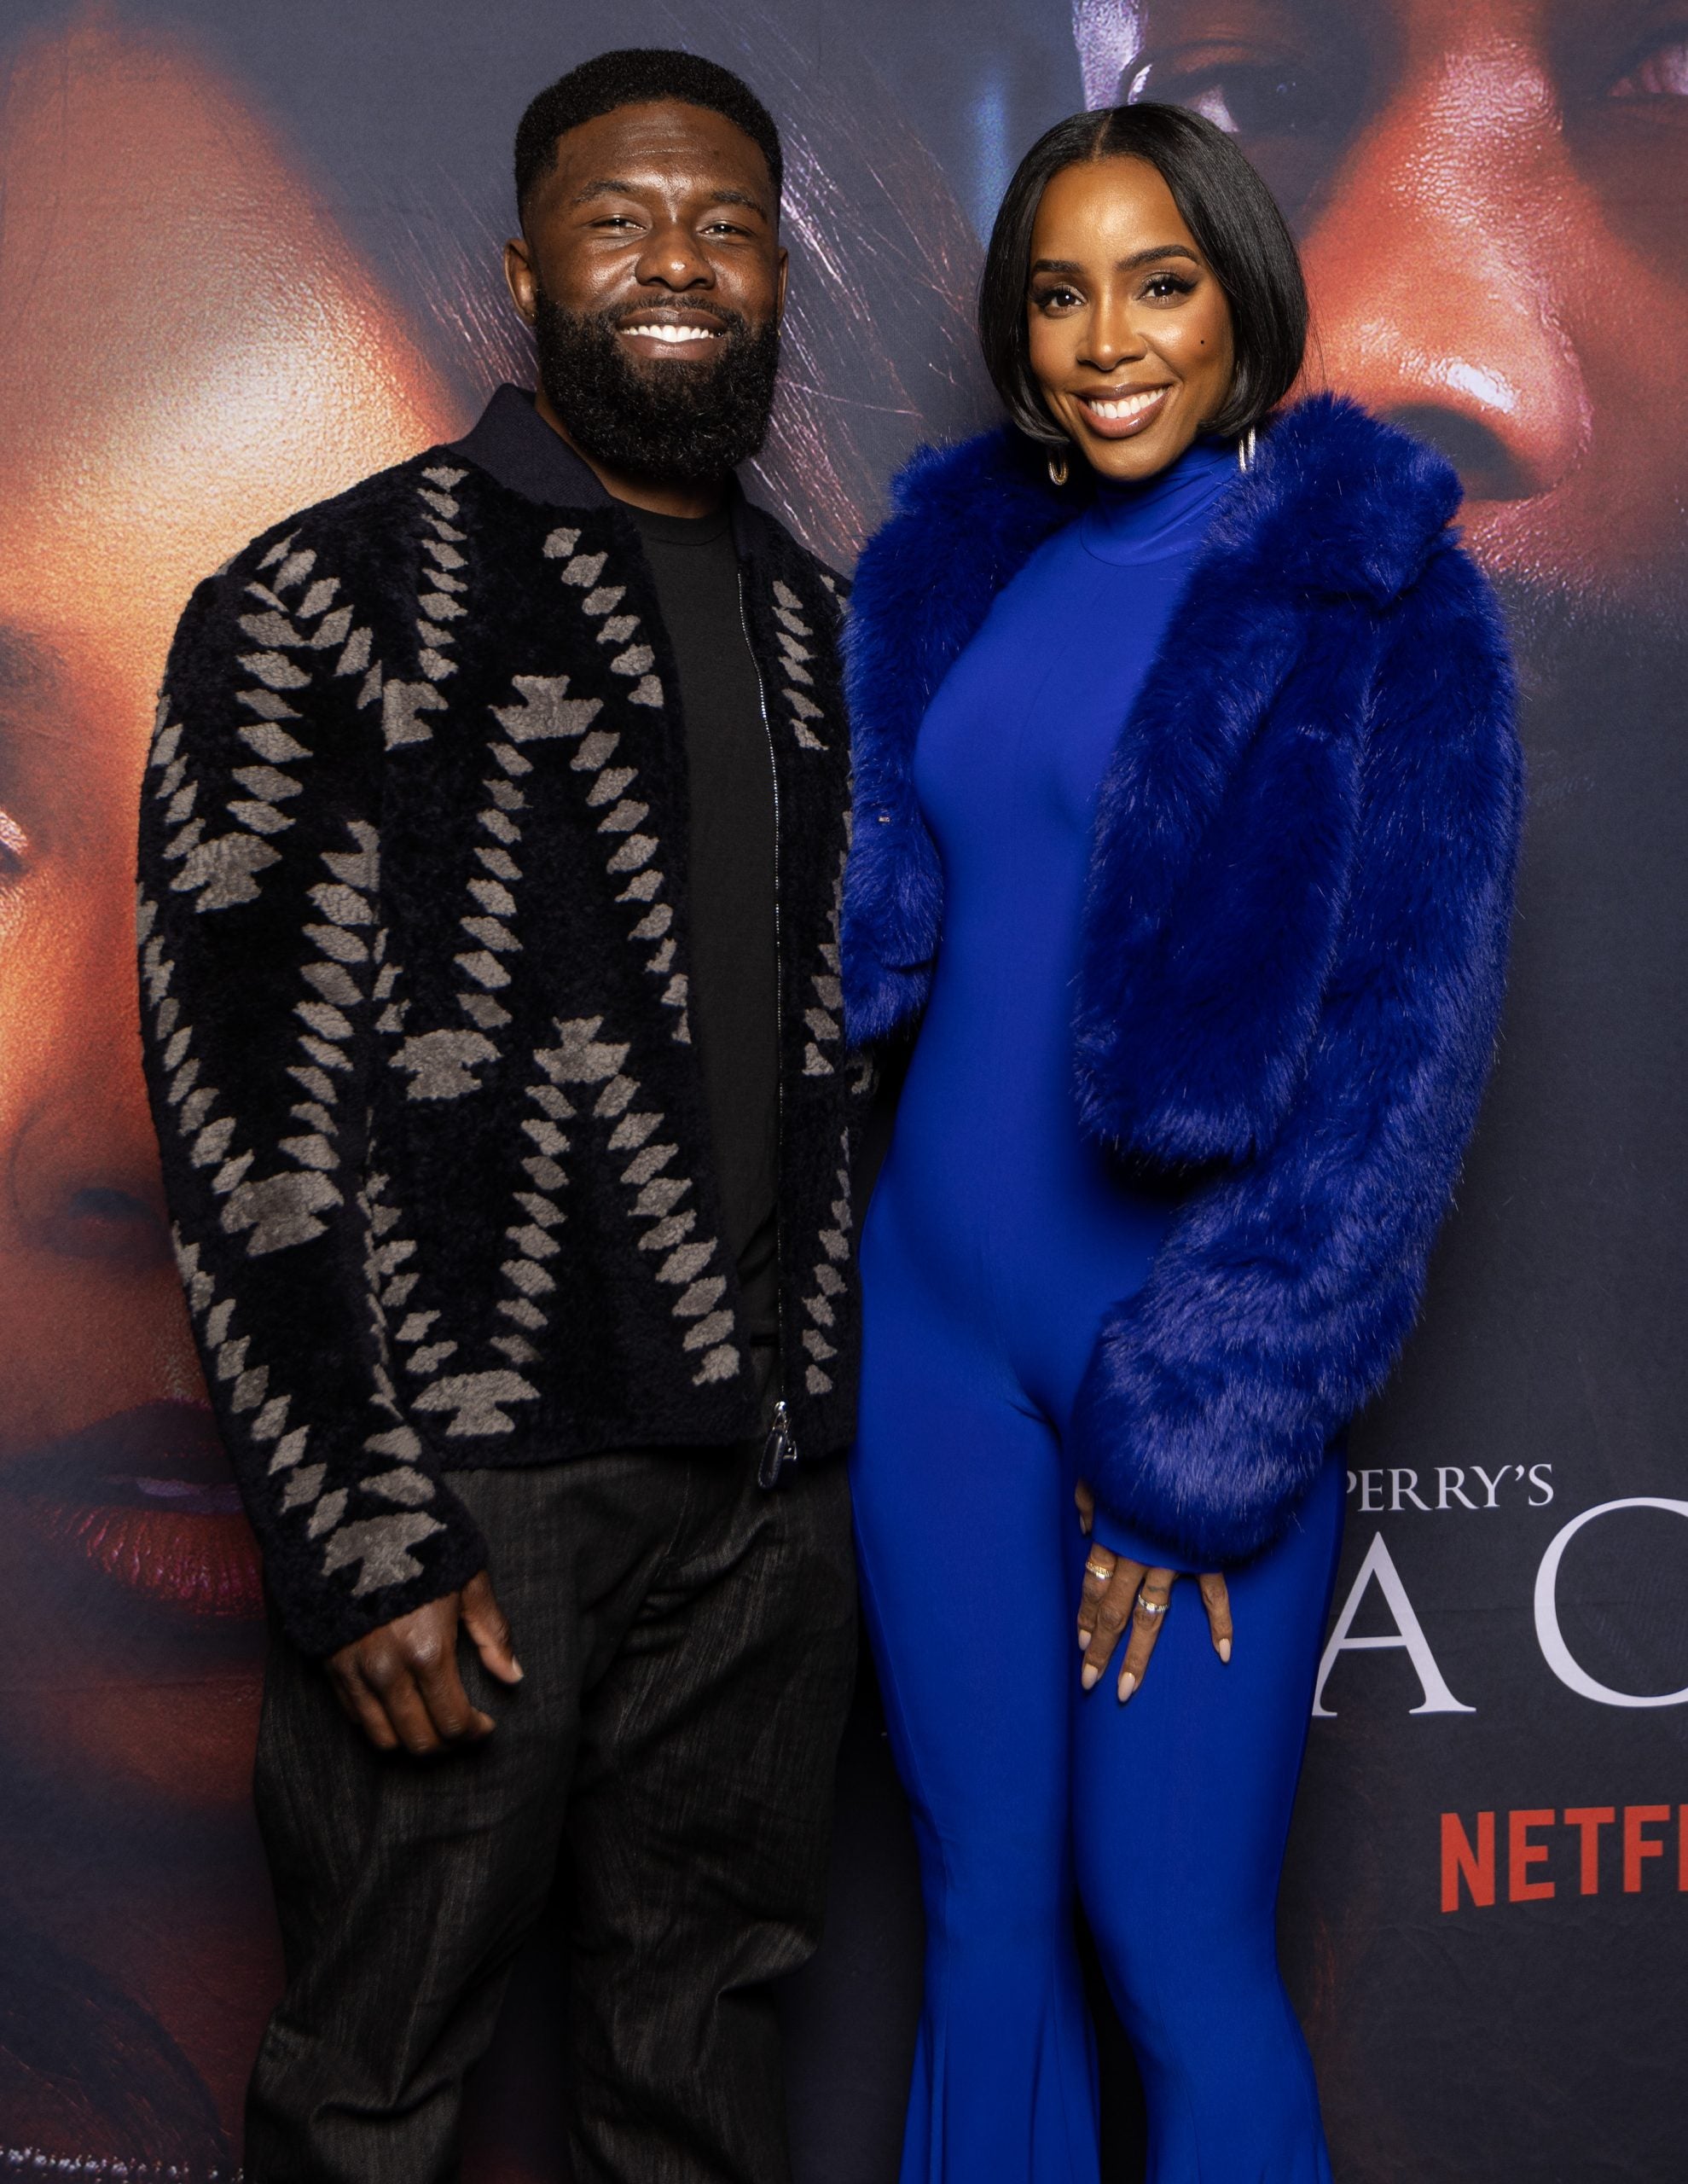 Kelly Rowland Rushed Home To Her Husband After Shooting That ‘Mea Culpa’ Sex Scene